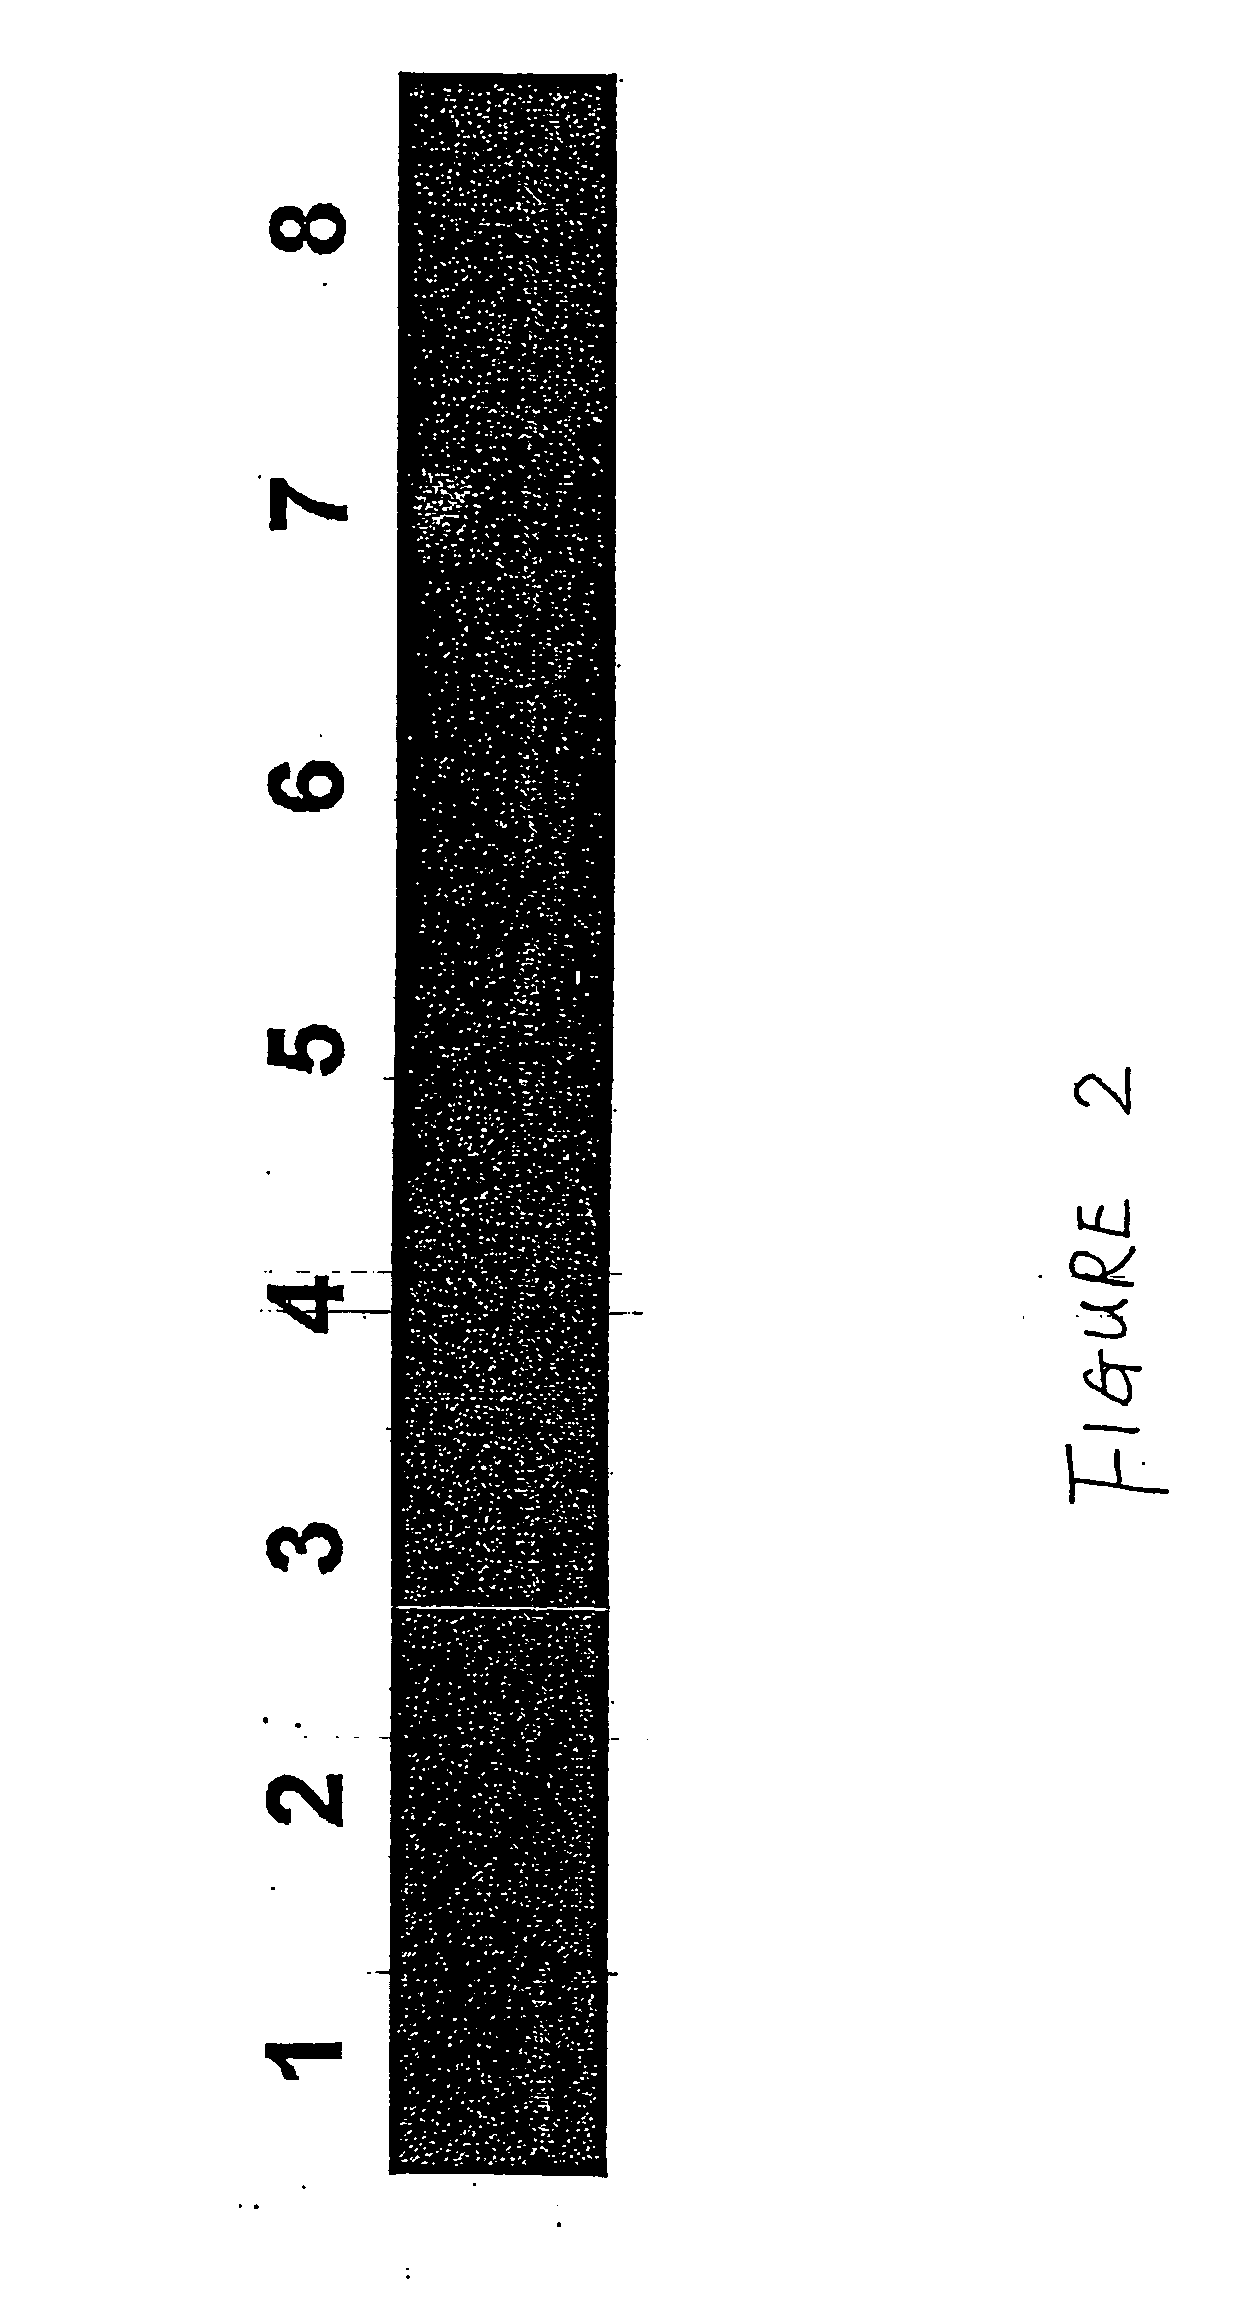 Method for the detection of coronary artery disease related gene transcripts in blood